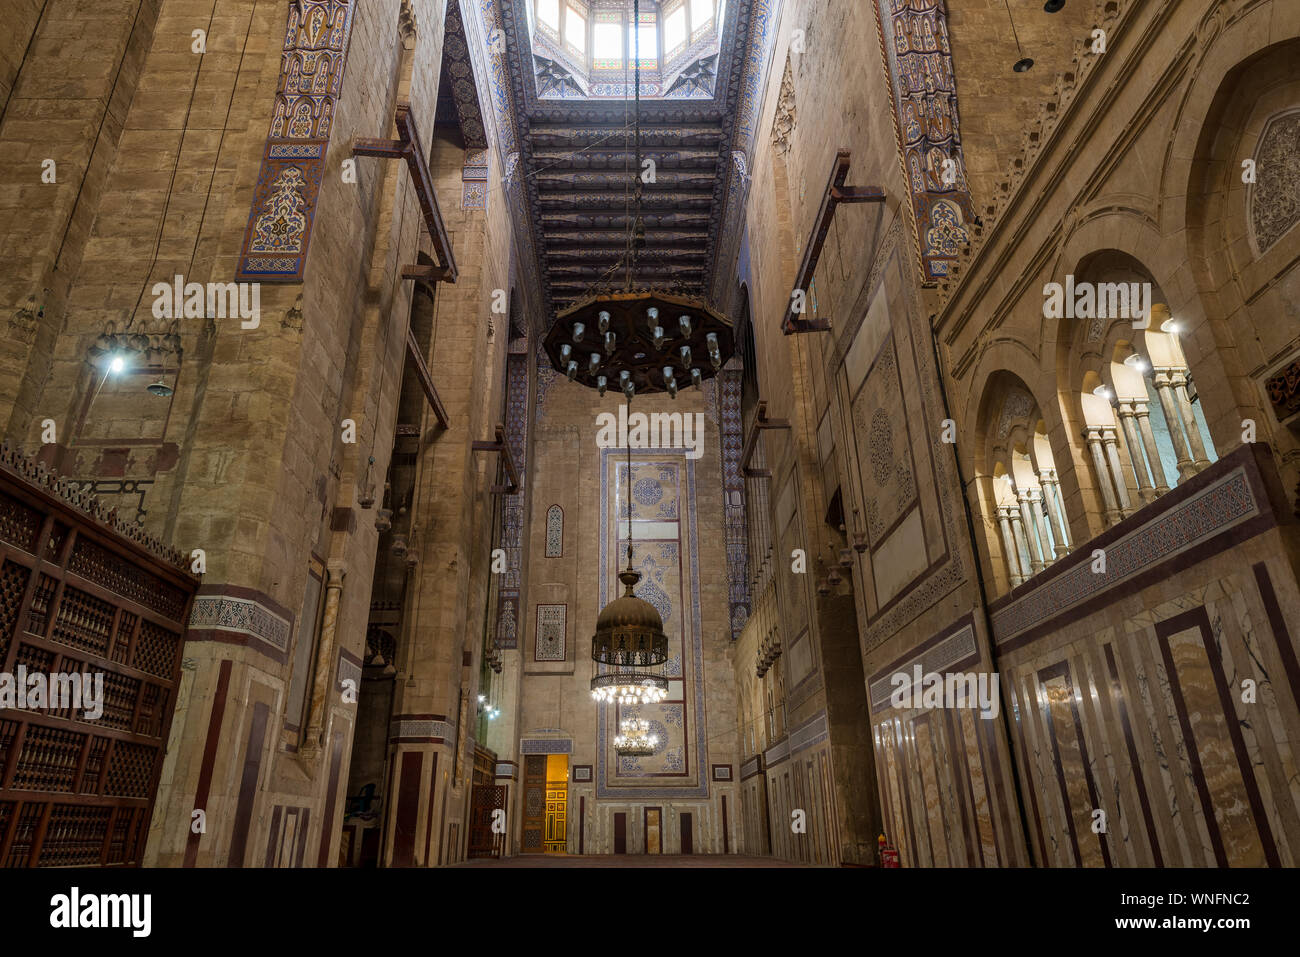 Interior of al Refai mosque with old decorated bricks stone wall, colored marble decorations, wooden ornate ceiling, big brass chandeliers, and wooden latticework door, Cairo, Egypt Stock Photo